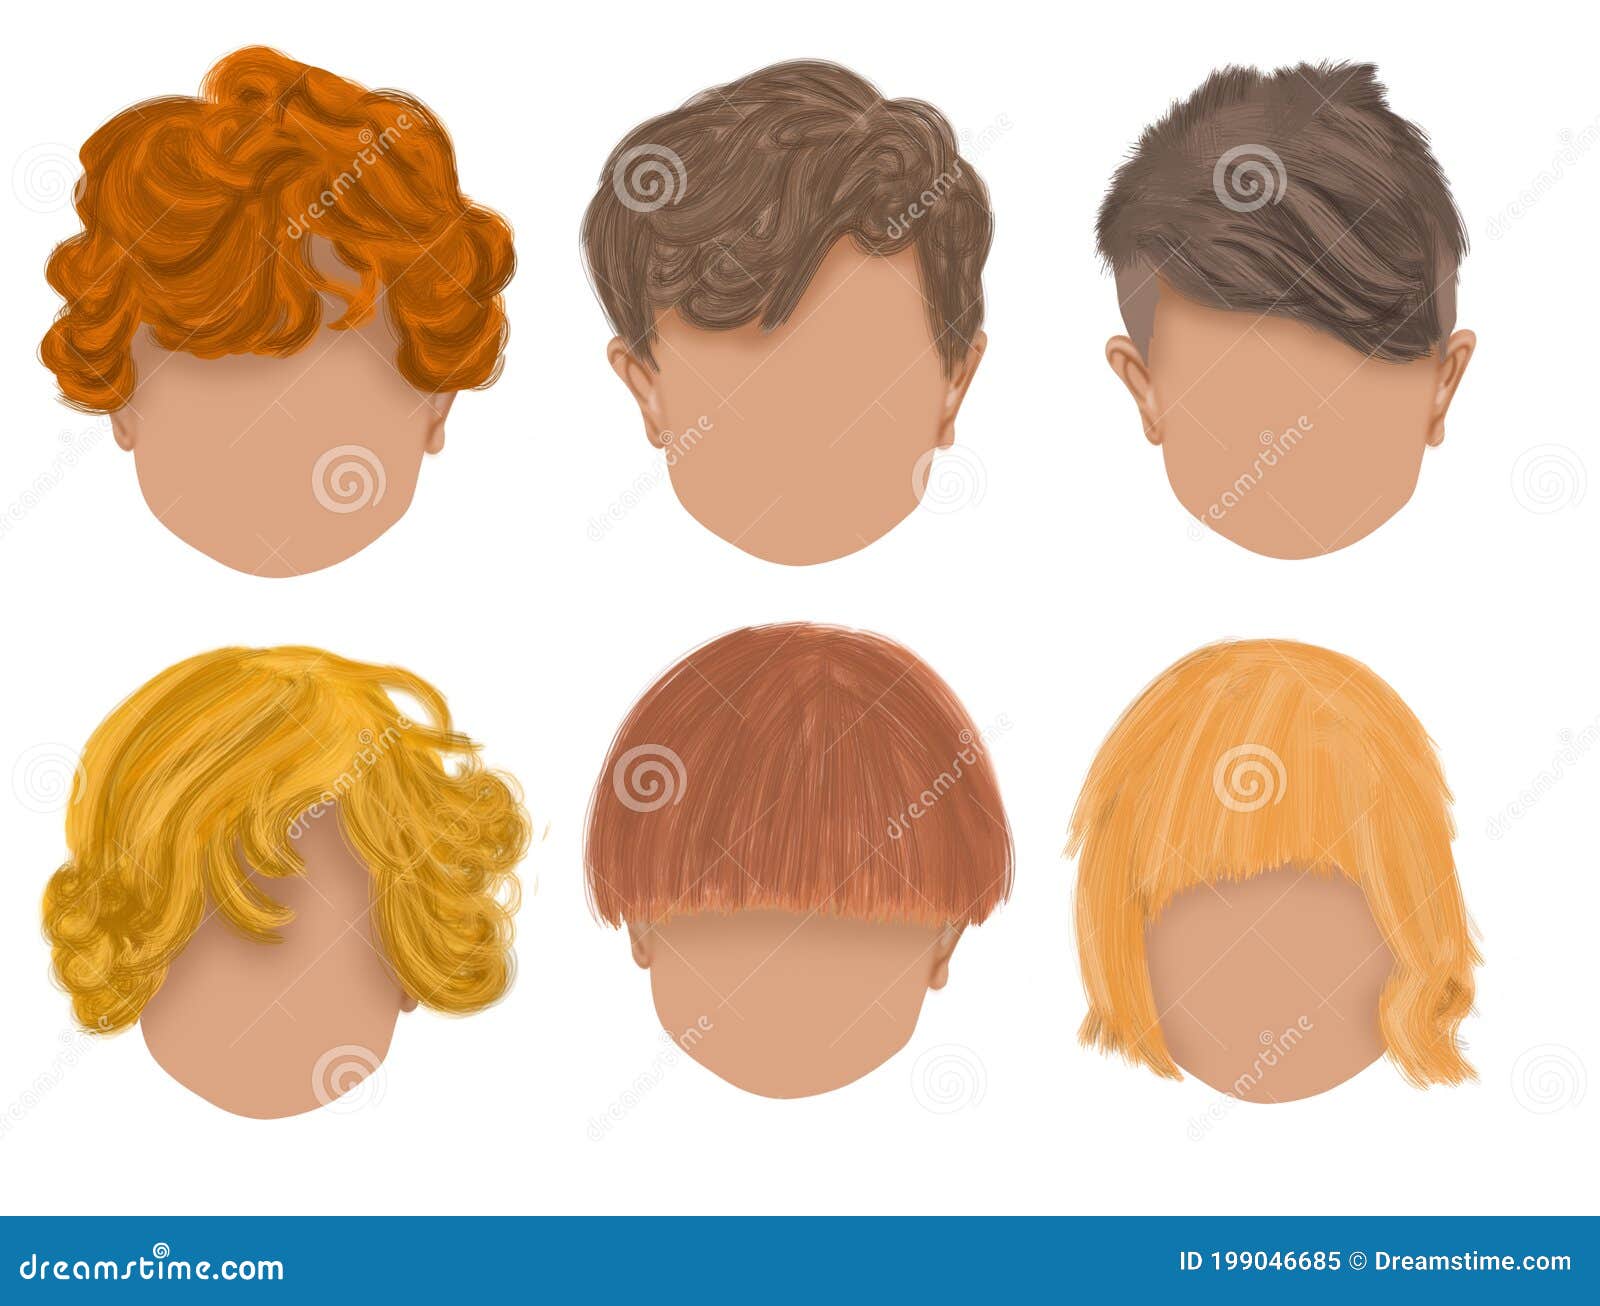 Hair and hair brush stock vector. Illustration of hairstyles - 271338335